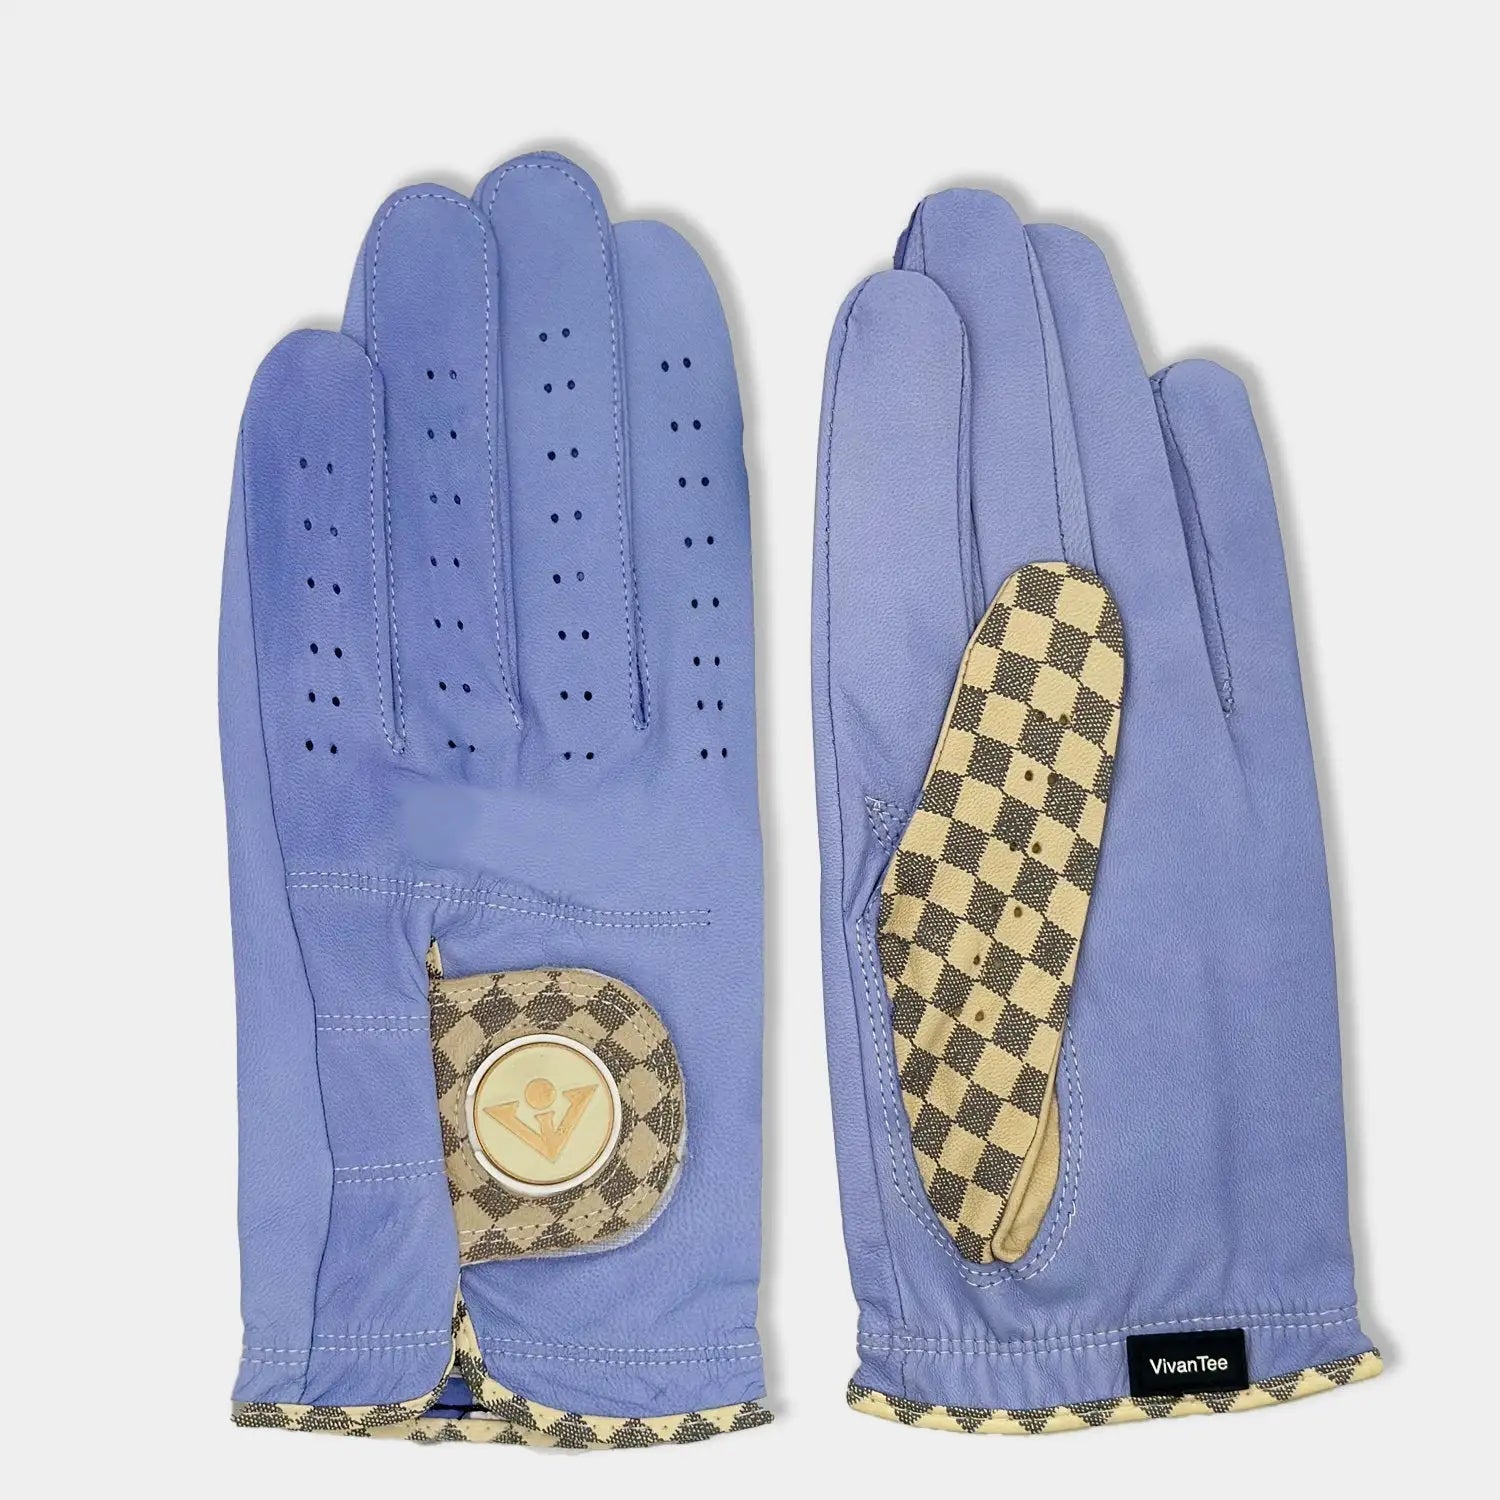 Men's Purple golf glove with tan checkered thumb and pull tab patterns, view of the top with magnetic ball markers and bottom of golf glove. 